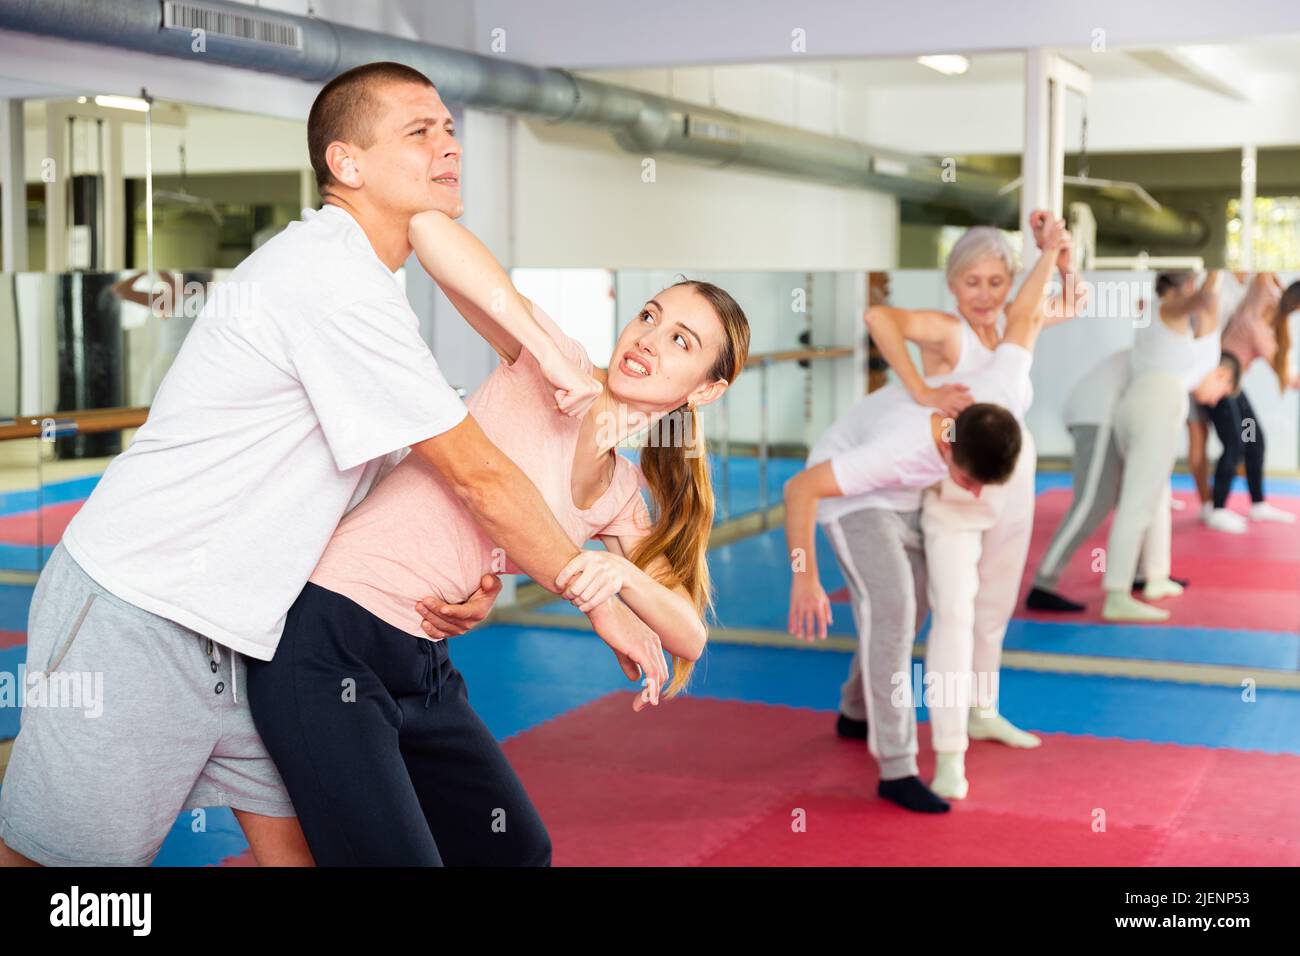 Woman makes a choke hold in self-defense training Stock Photo - Alamy